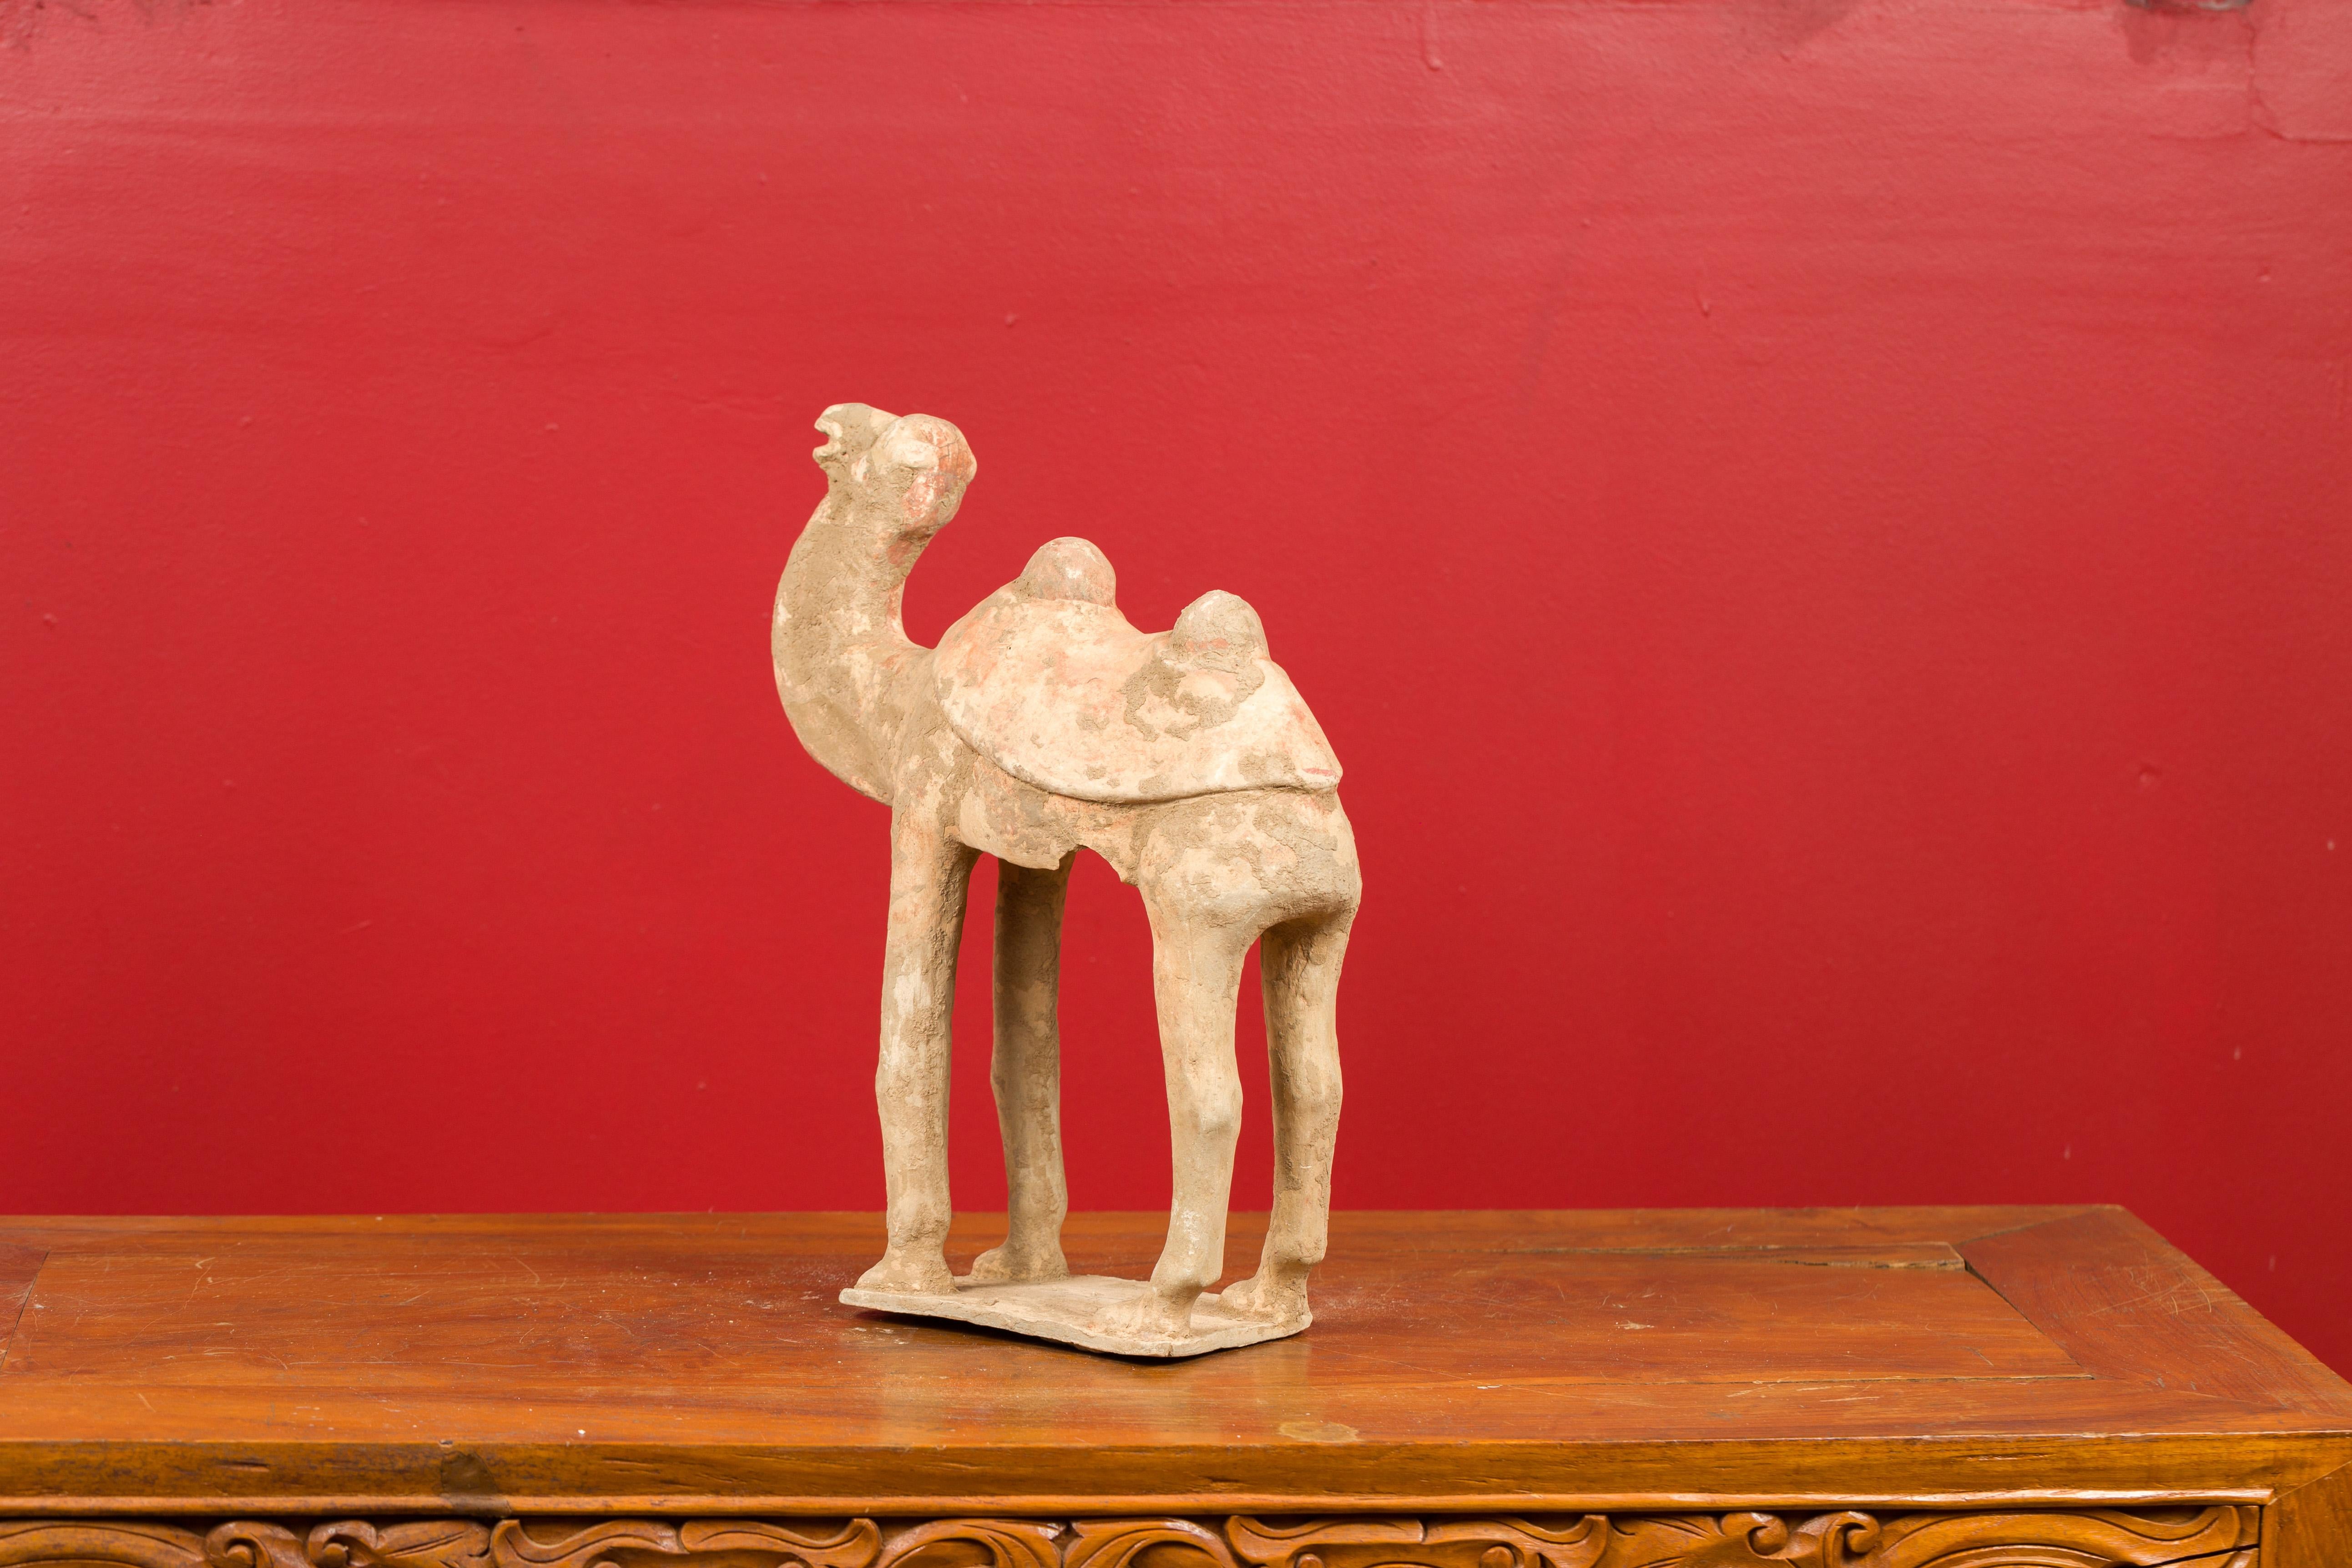 Chinese Han Dynasty 202 BC-200 AD Mingqi Camel with Original Orange Paint 6